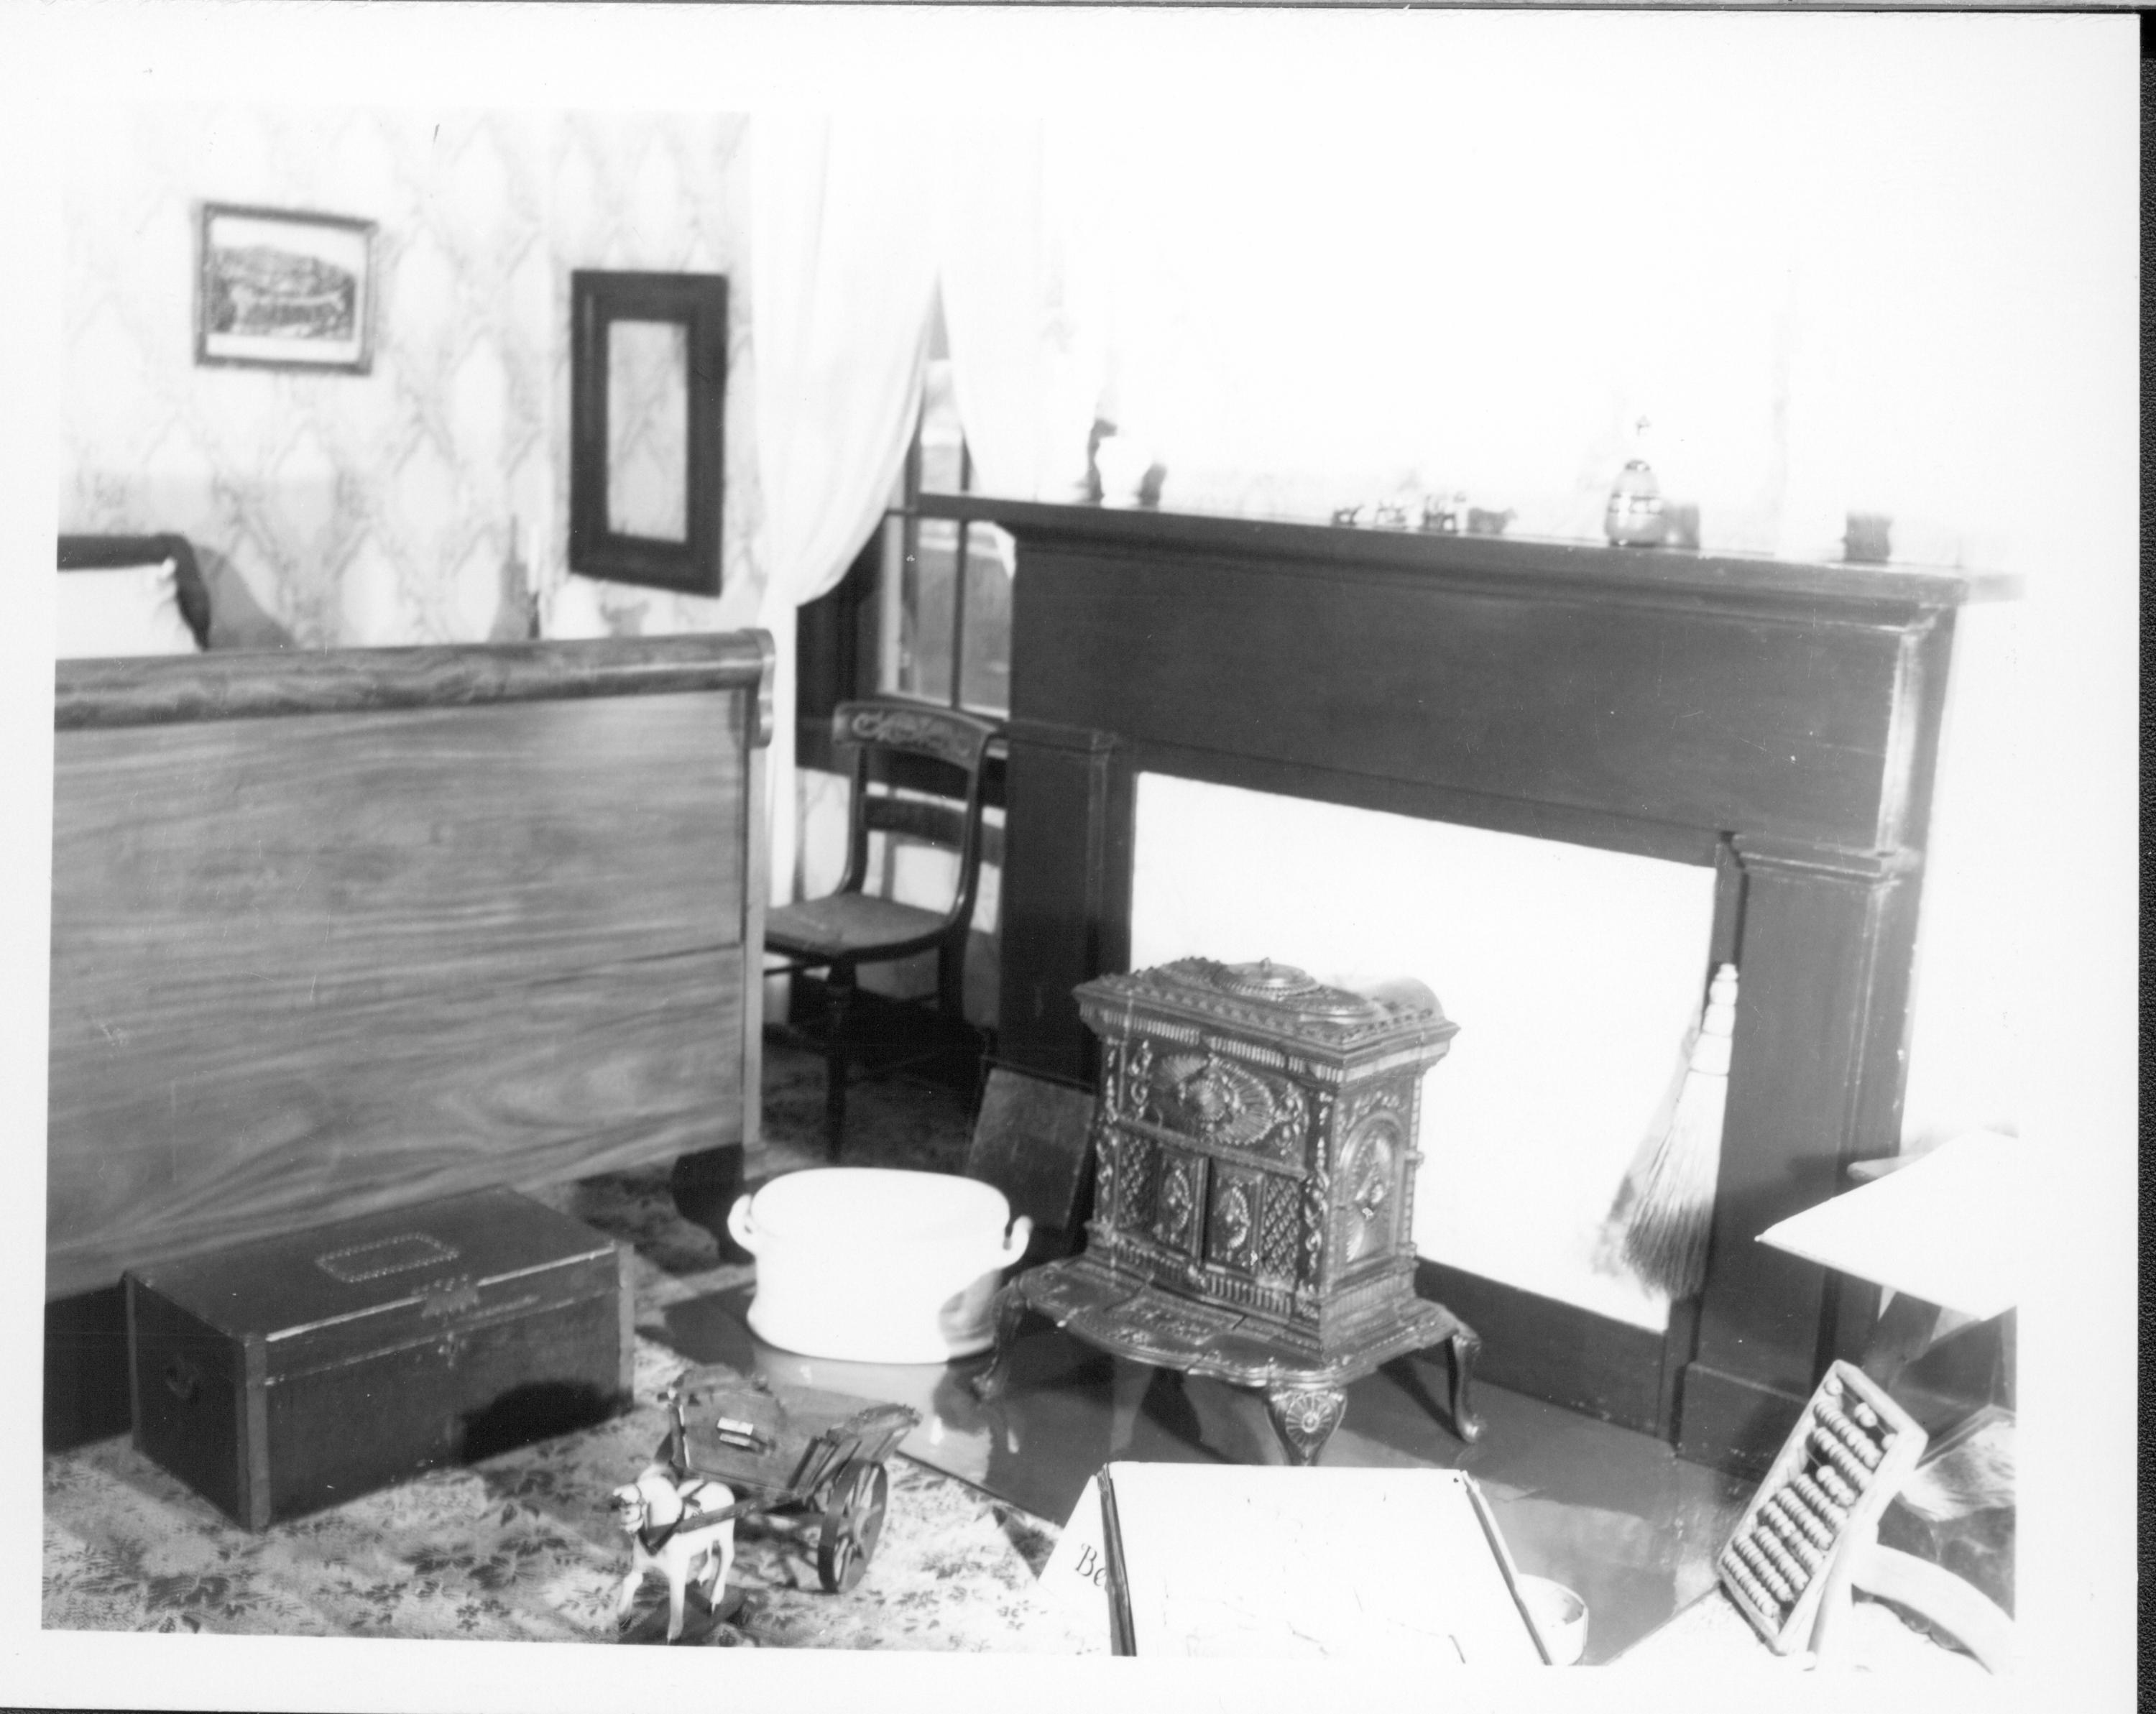 Boy's Bedroom - Lincoln's Home neg.#27, class.#310 Lincoln, Home, Guest Bedroom, Boy's Bedroom